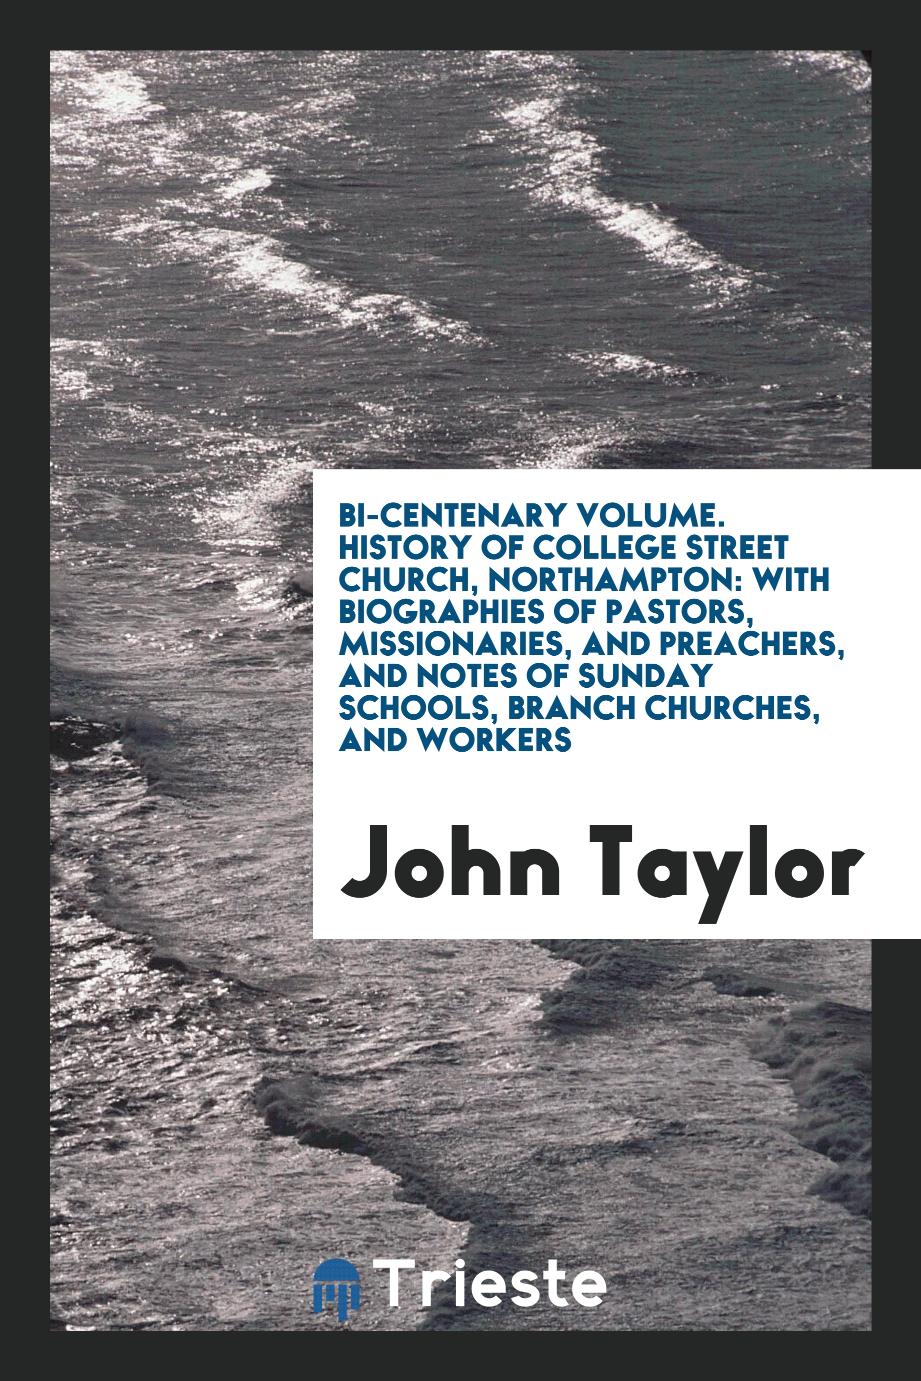 Bi-Centenary Volume. History of College Street Church, Northampton: With Biographies of Pastors, Missionaries, and Preachers, and Notes of Sunday Schools, Branch Churches, and Workers